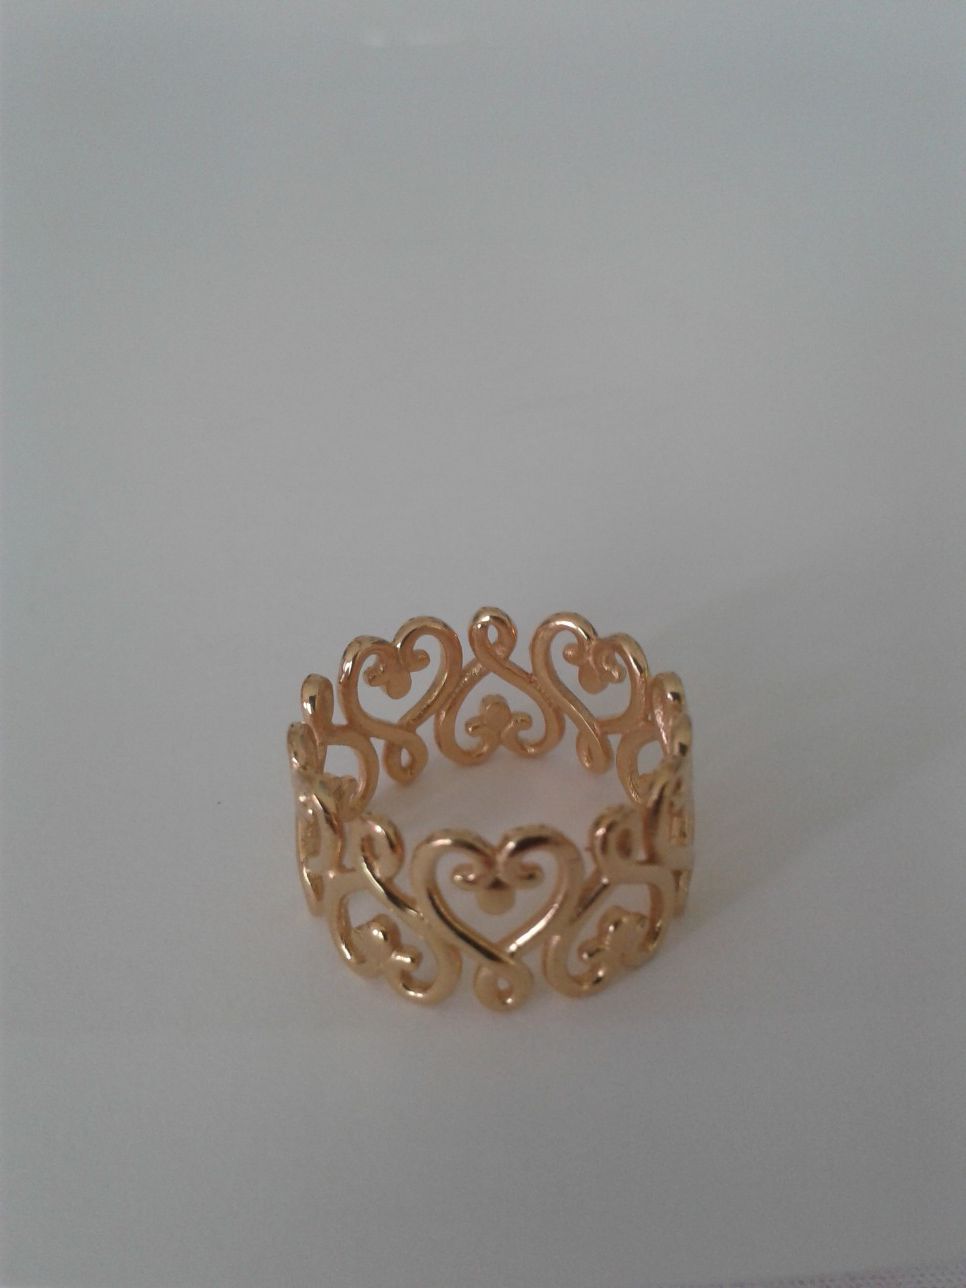 Entwined Hearts Ring, 14k Gold over Sterling Silver, Size 6